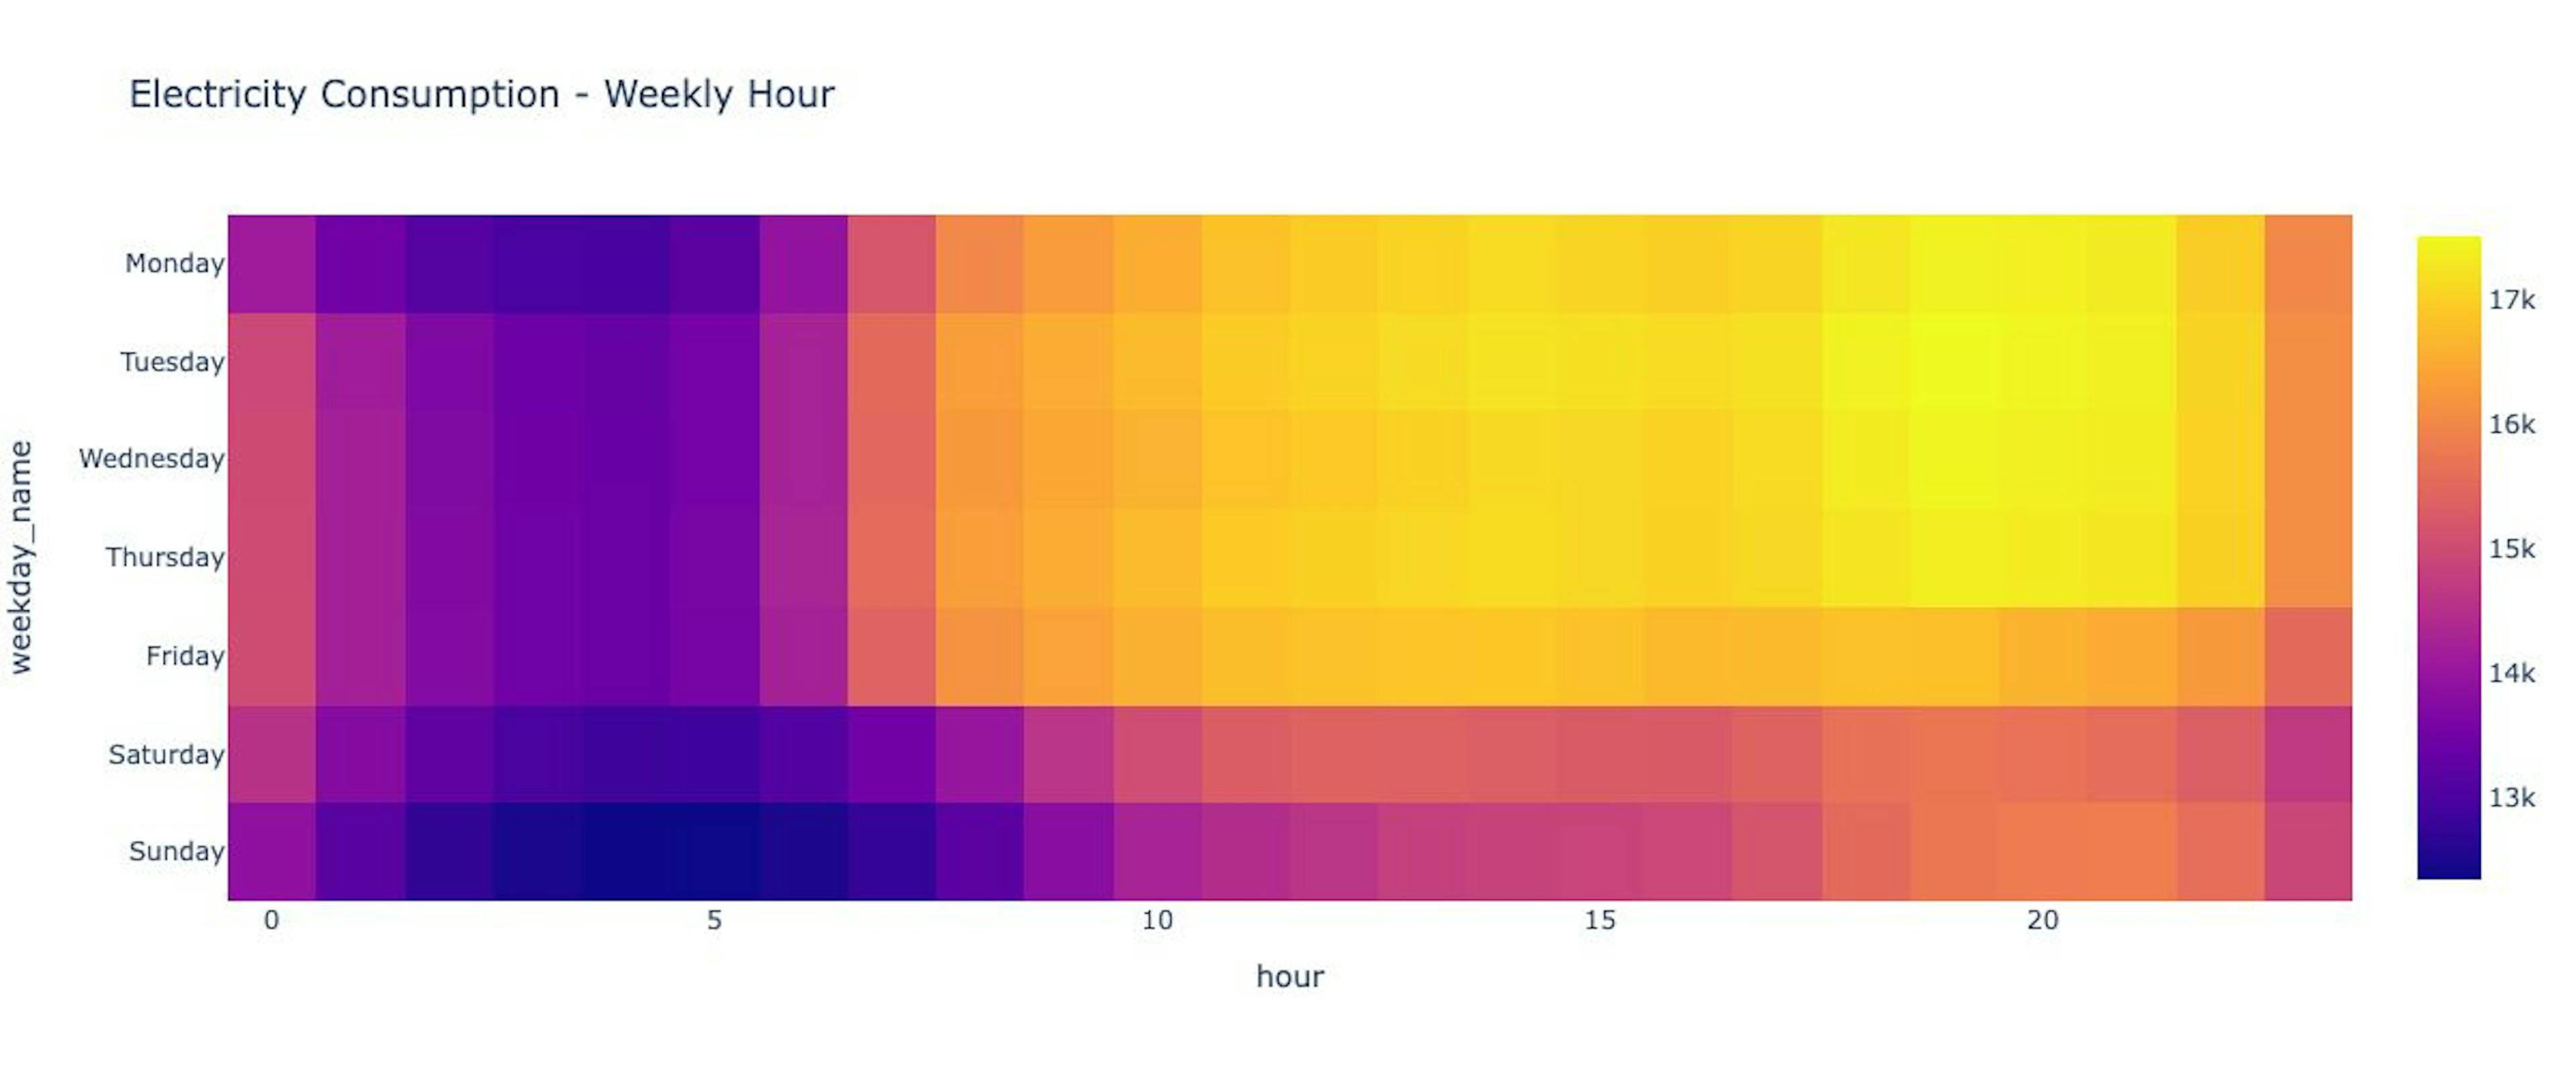 We observe that on weekdays, energy consumption notably increases during work hours compared to non-working hours and weekends.